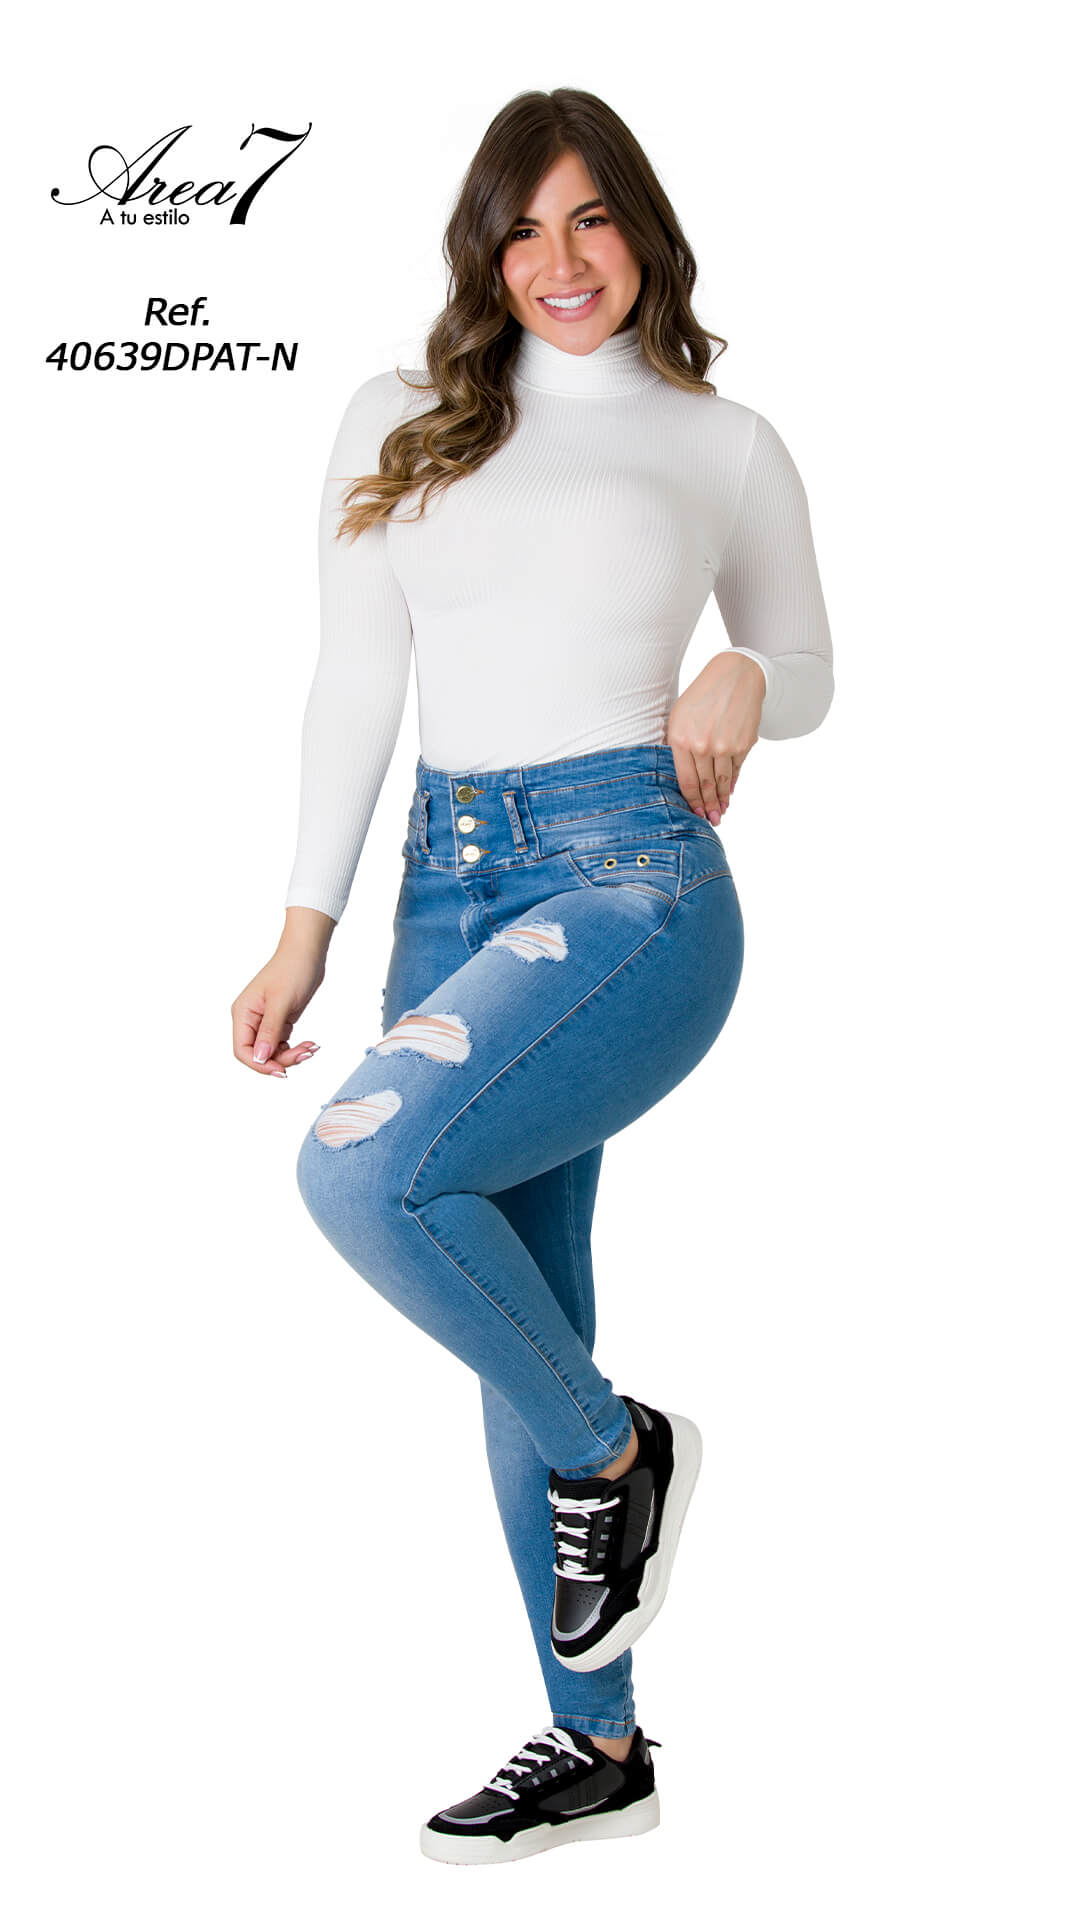 Ropa Colombiana Jeans Colombianos Originales K571 $49.29